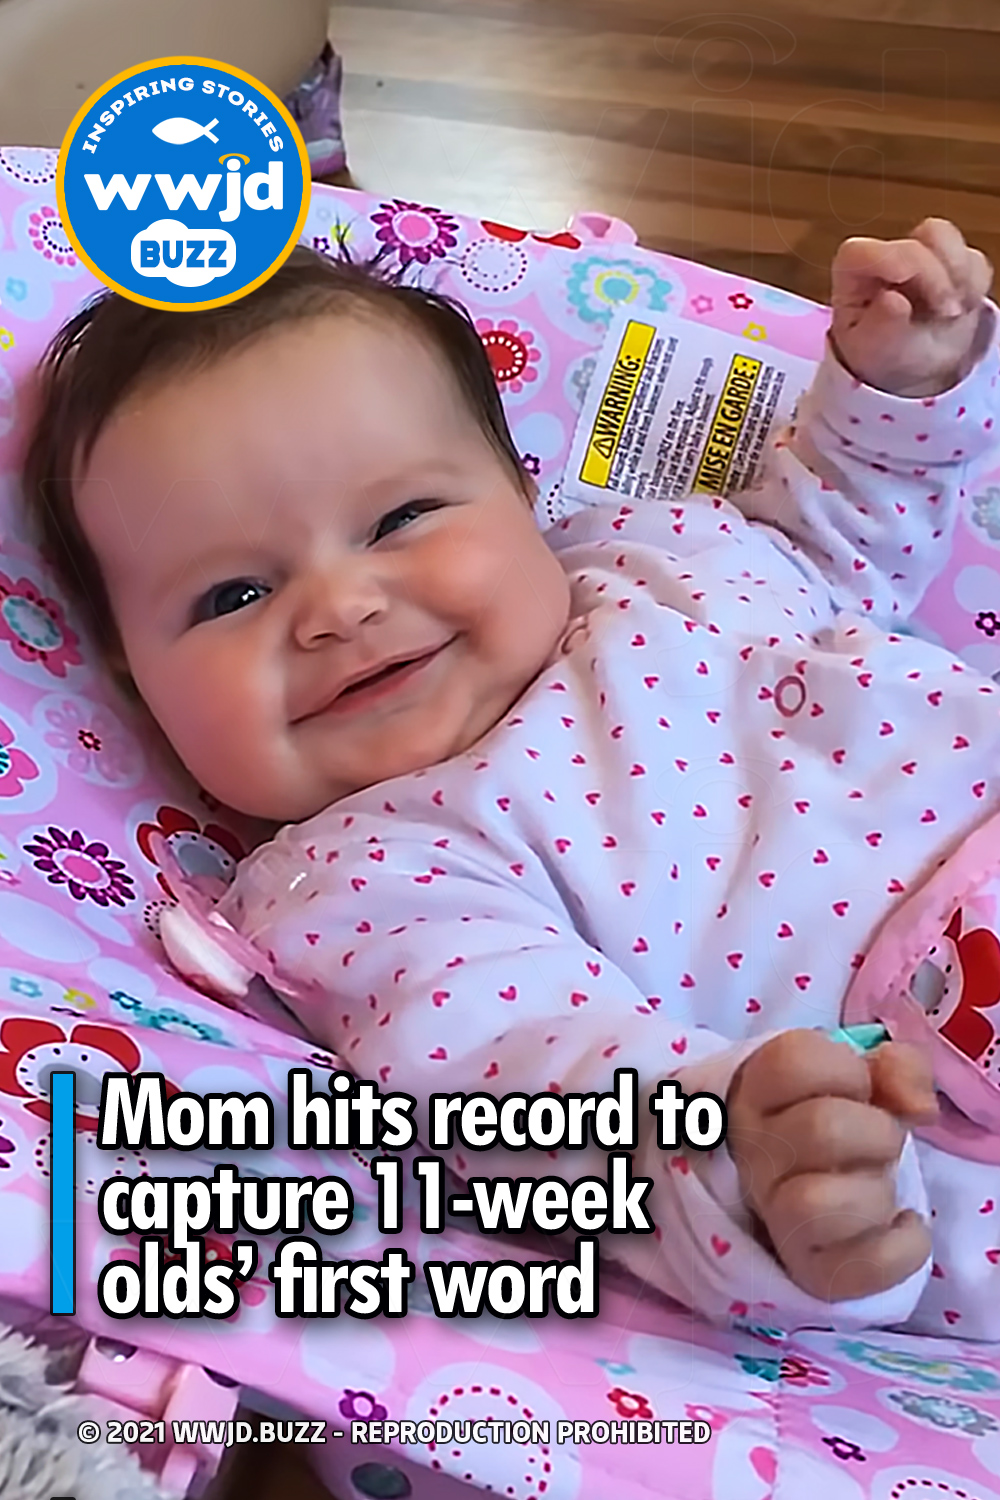 Mom hits record to capture 11-week olds’ first word